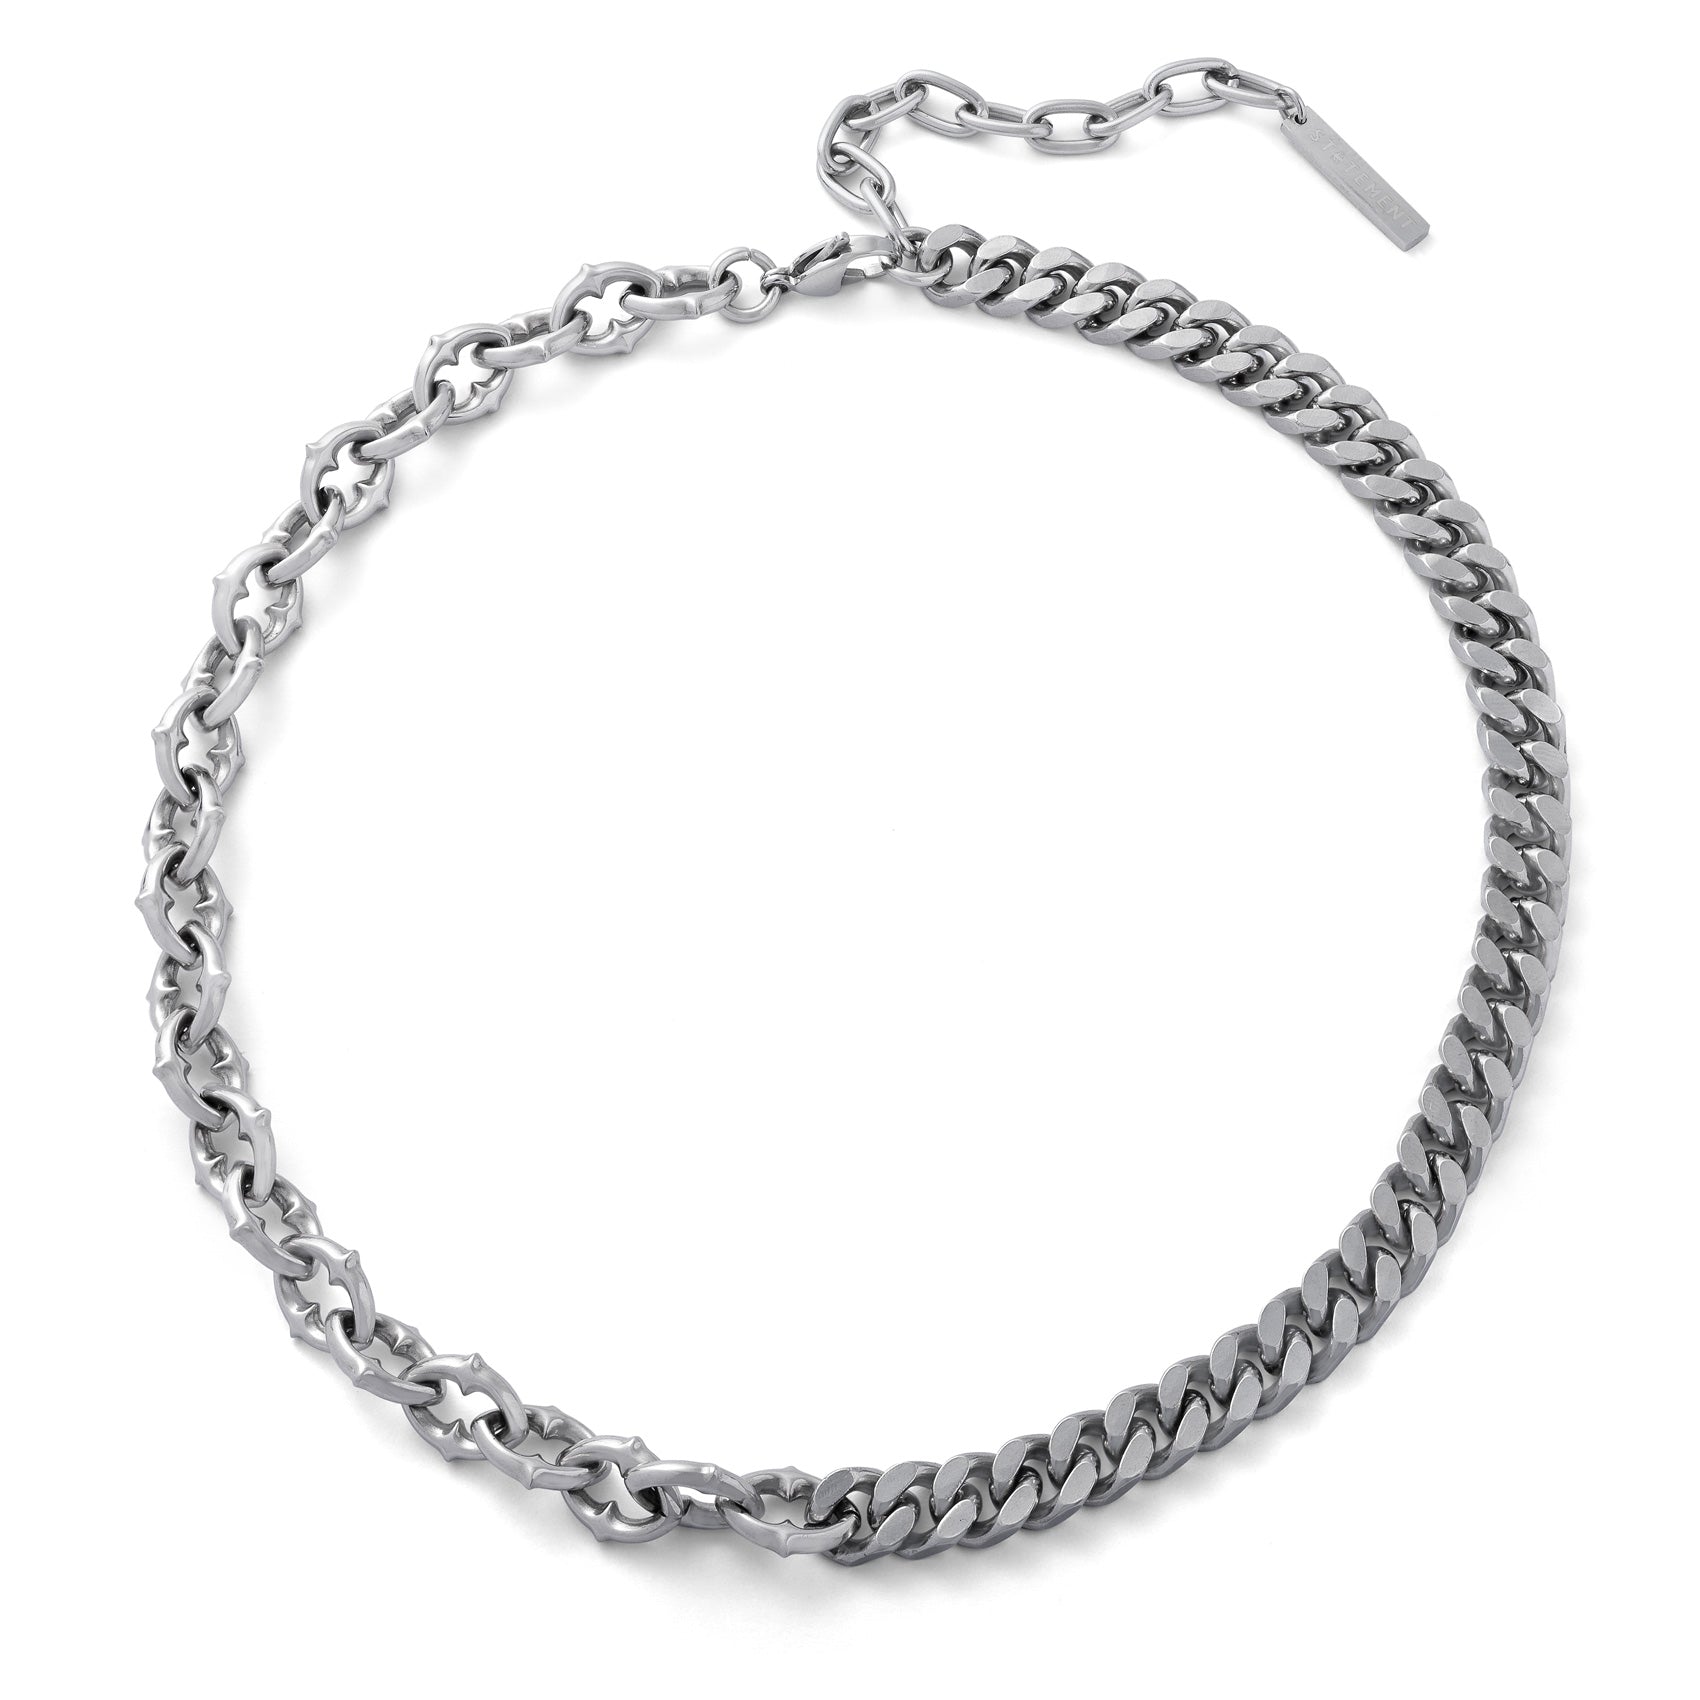 Statement Collective - “Split” Cathedral Link Spiked Chain (Adjustable)